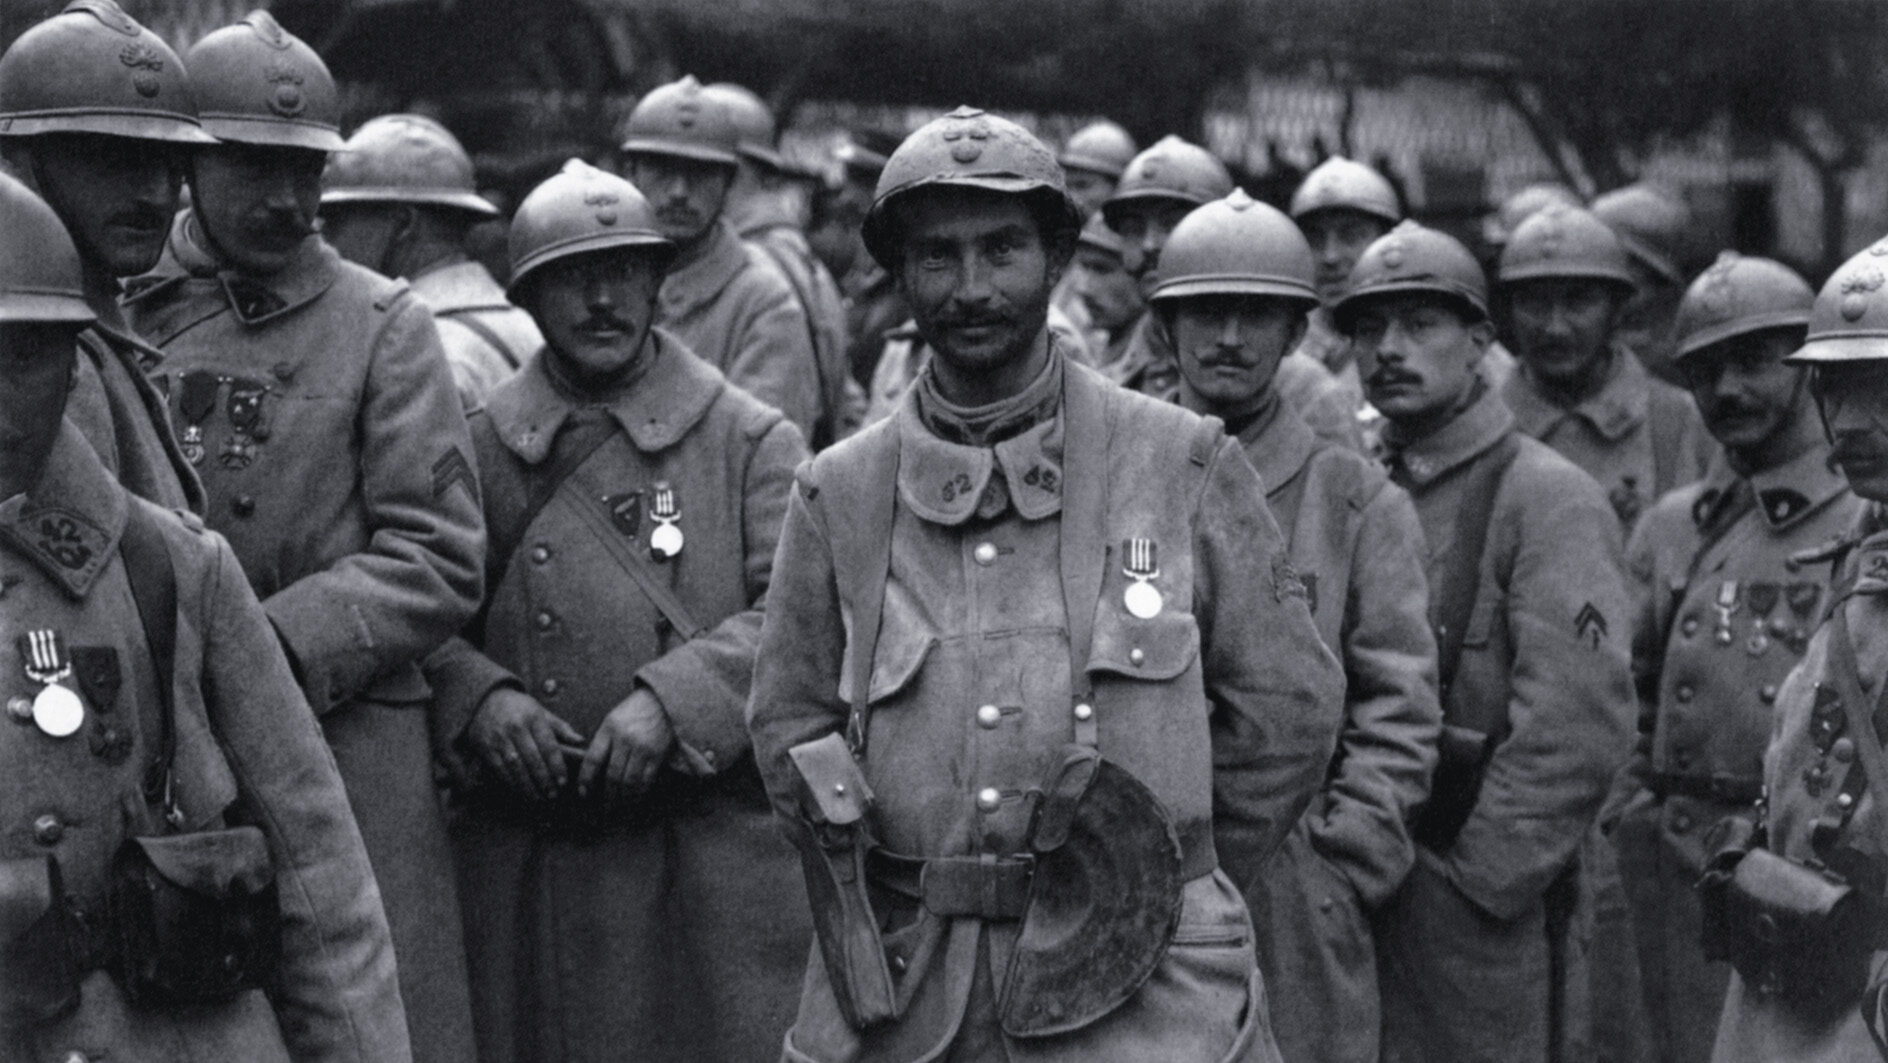 A newly decorated group of French soldiers poses for a photo while wearing the 1915 “Adrian” helmets.